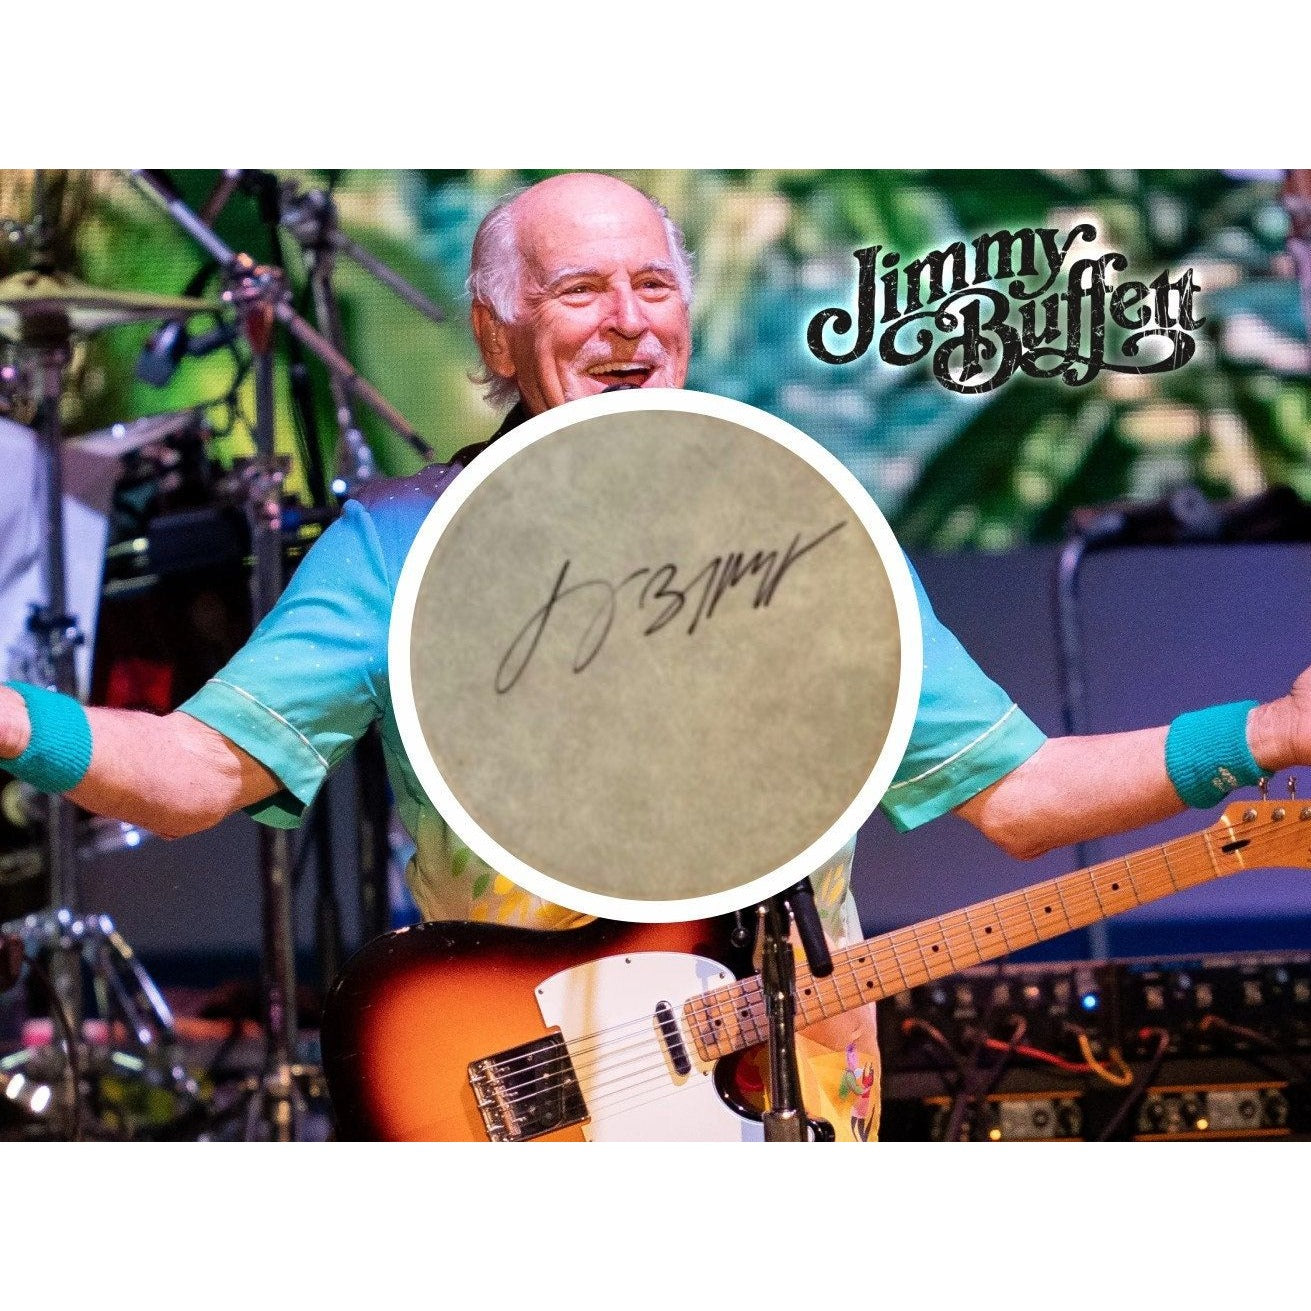 Jimmy Buffett 10 inch tambourine signed with proof